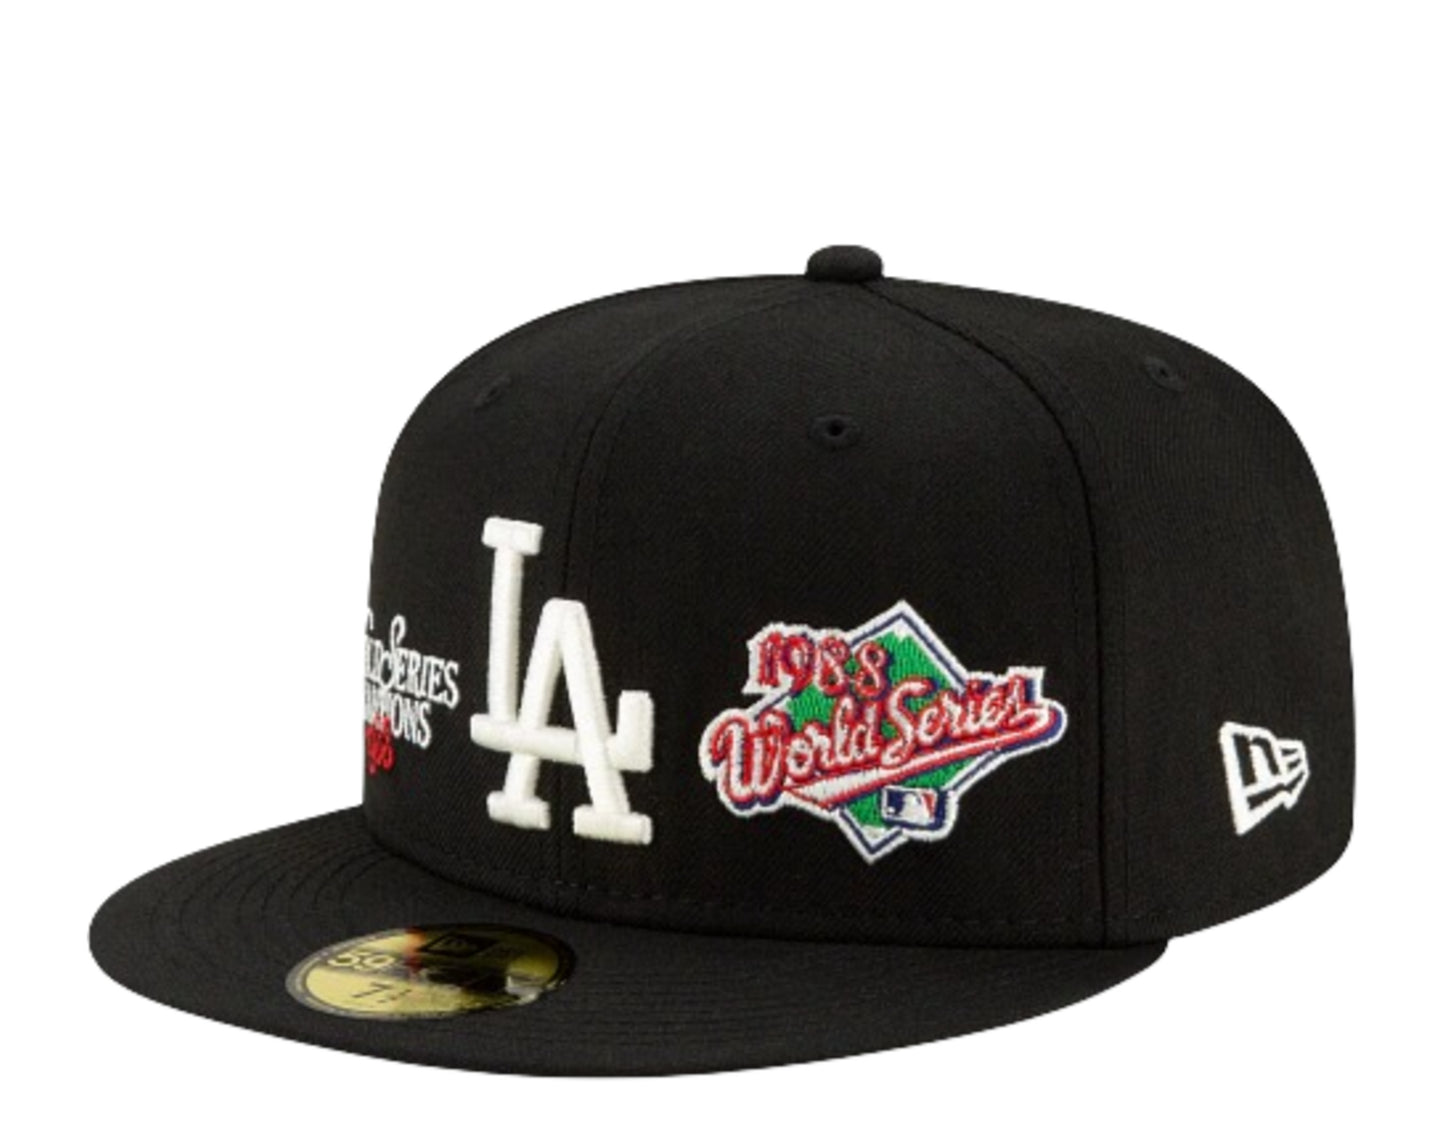 New Era 59Fifty Los Angeles Dodgers Champions Fitted Hat